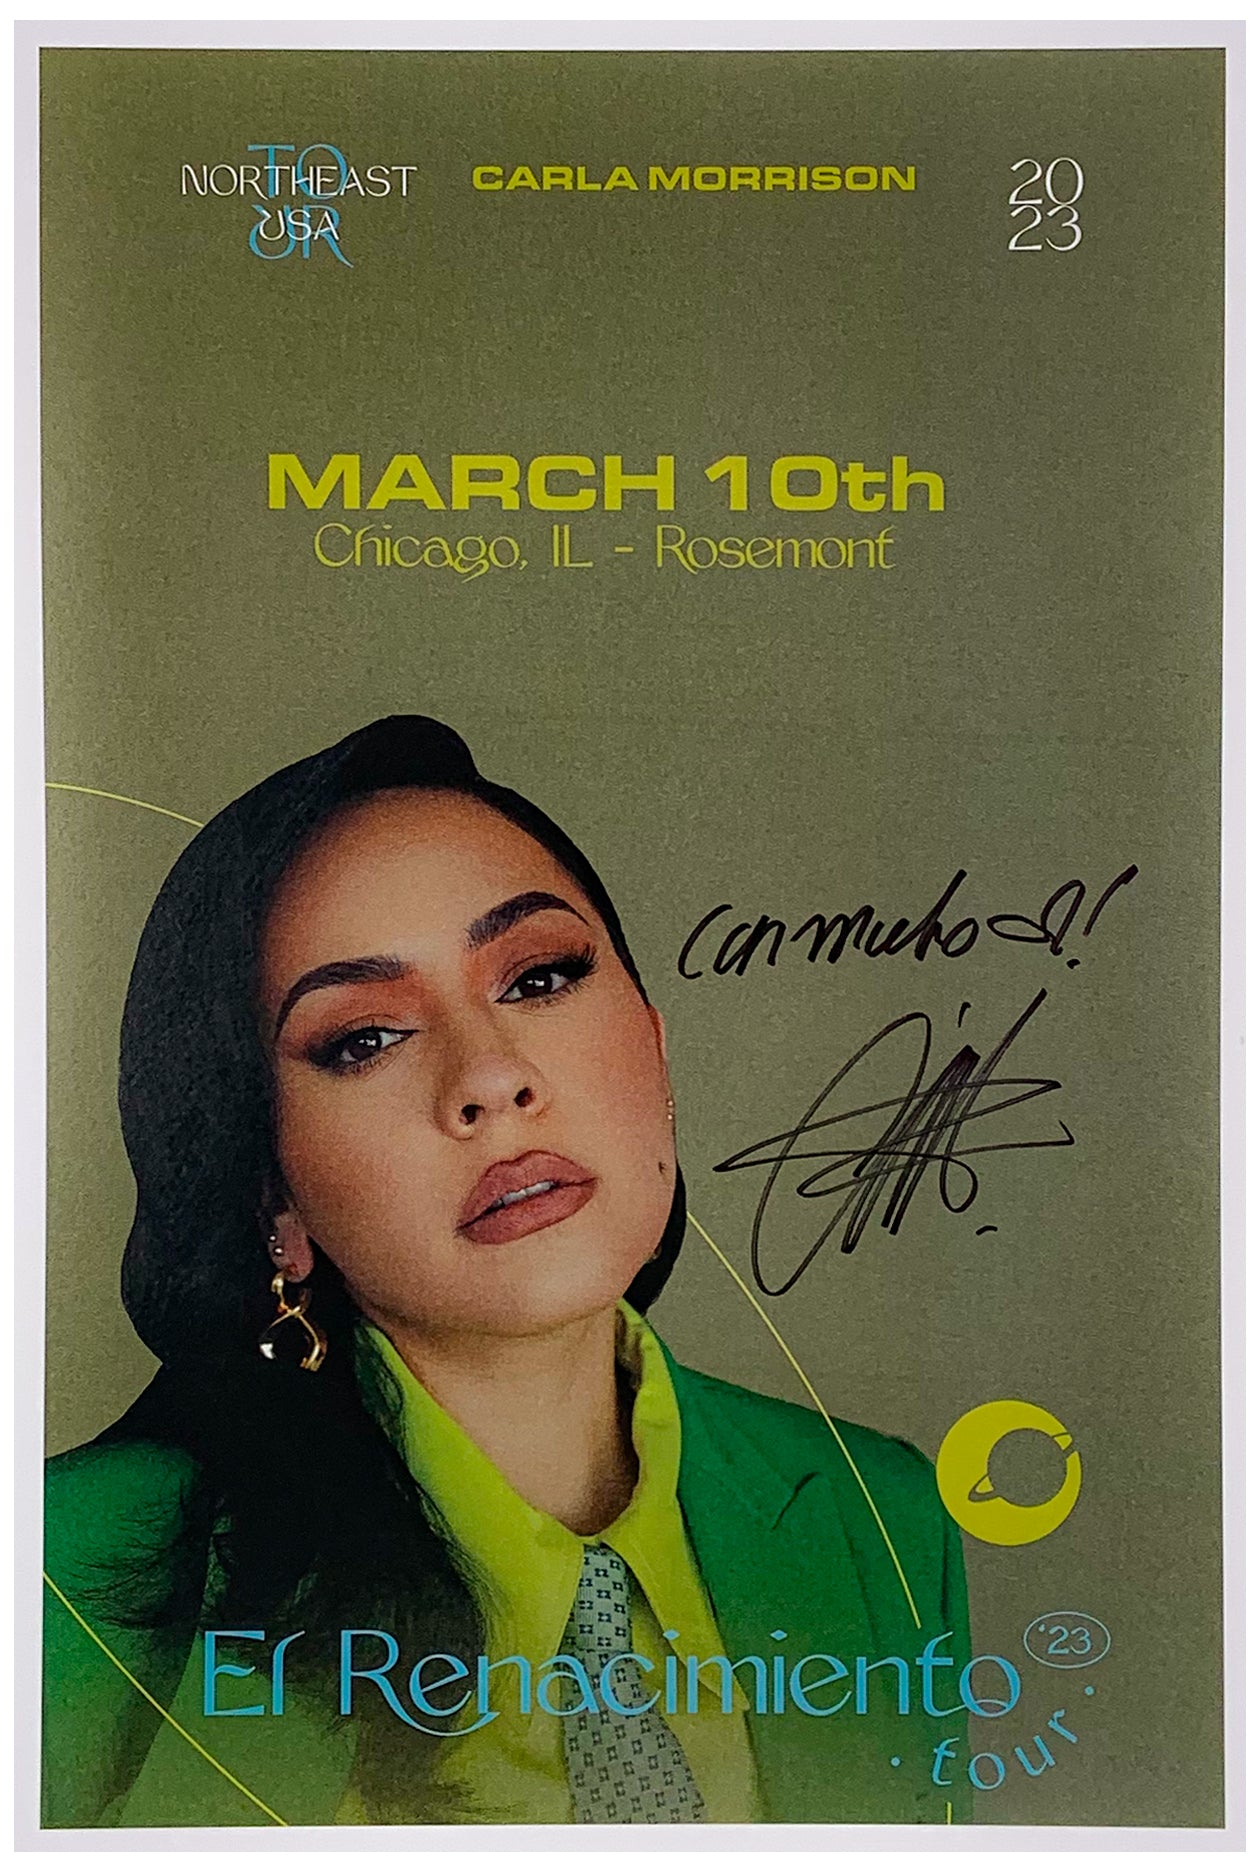 Carla Morrison Autograph Poster from the Rosemont in Chicago Il